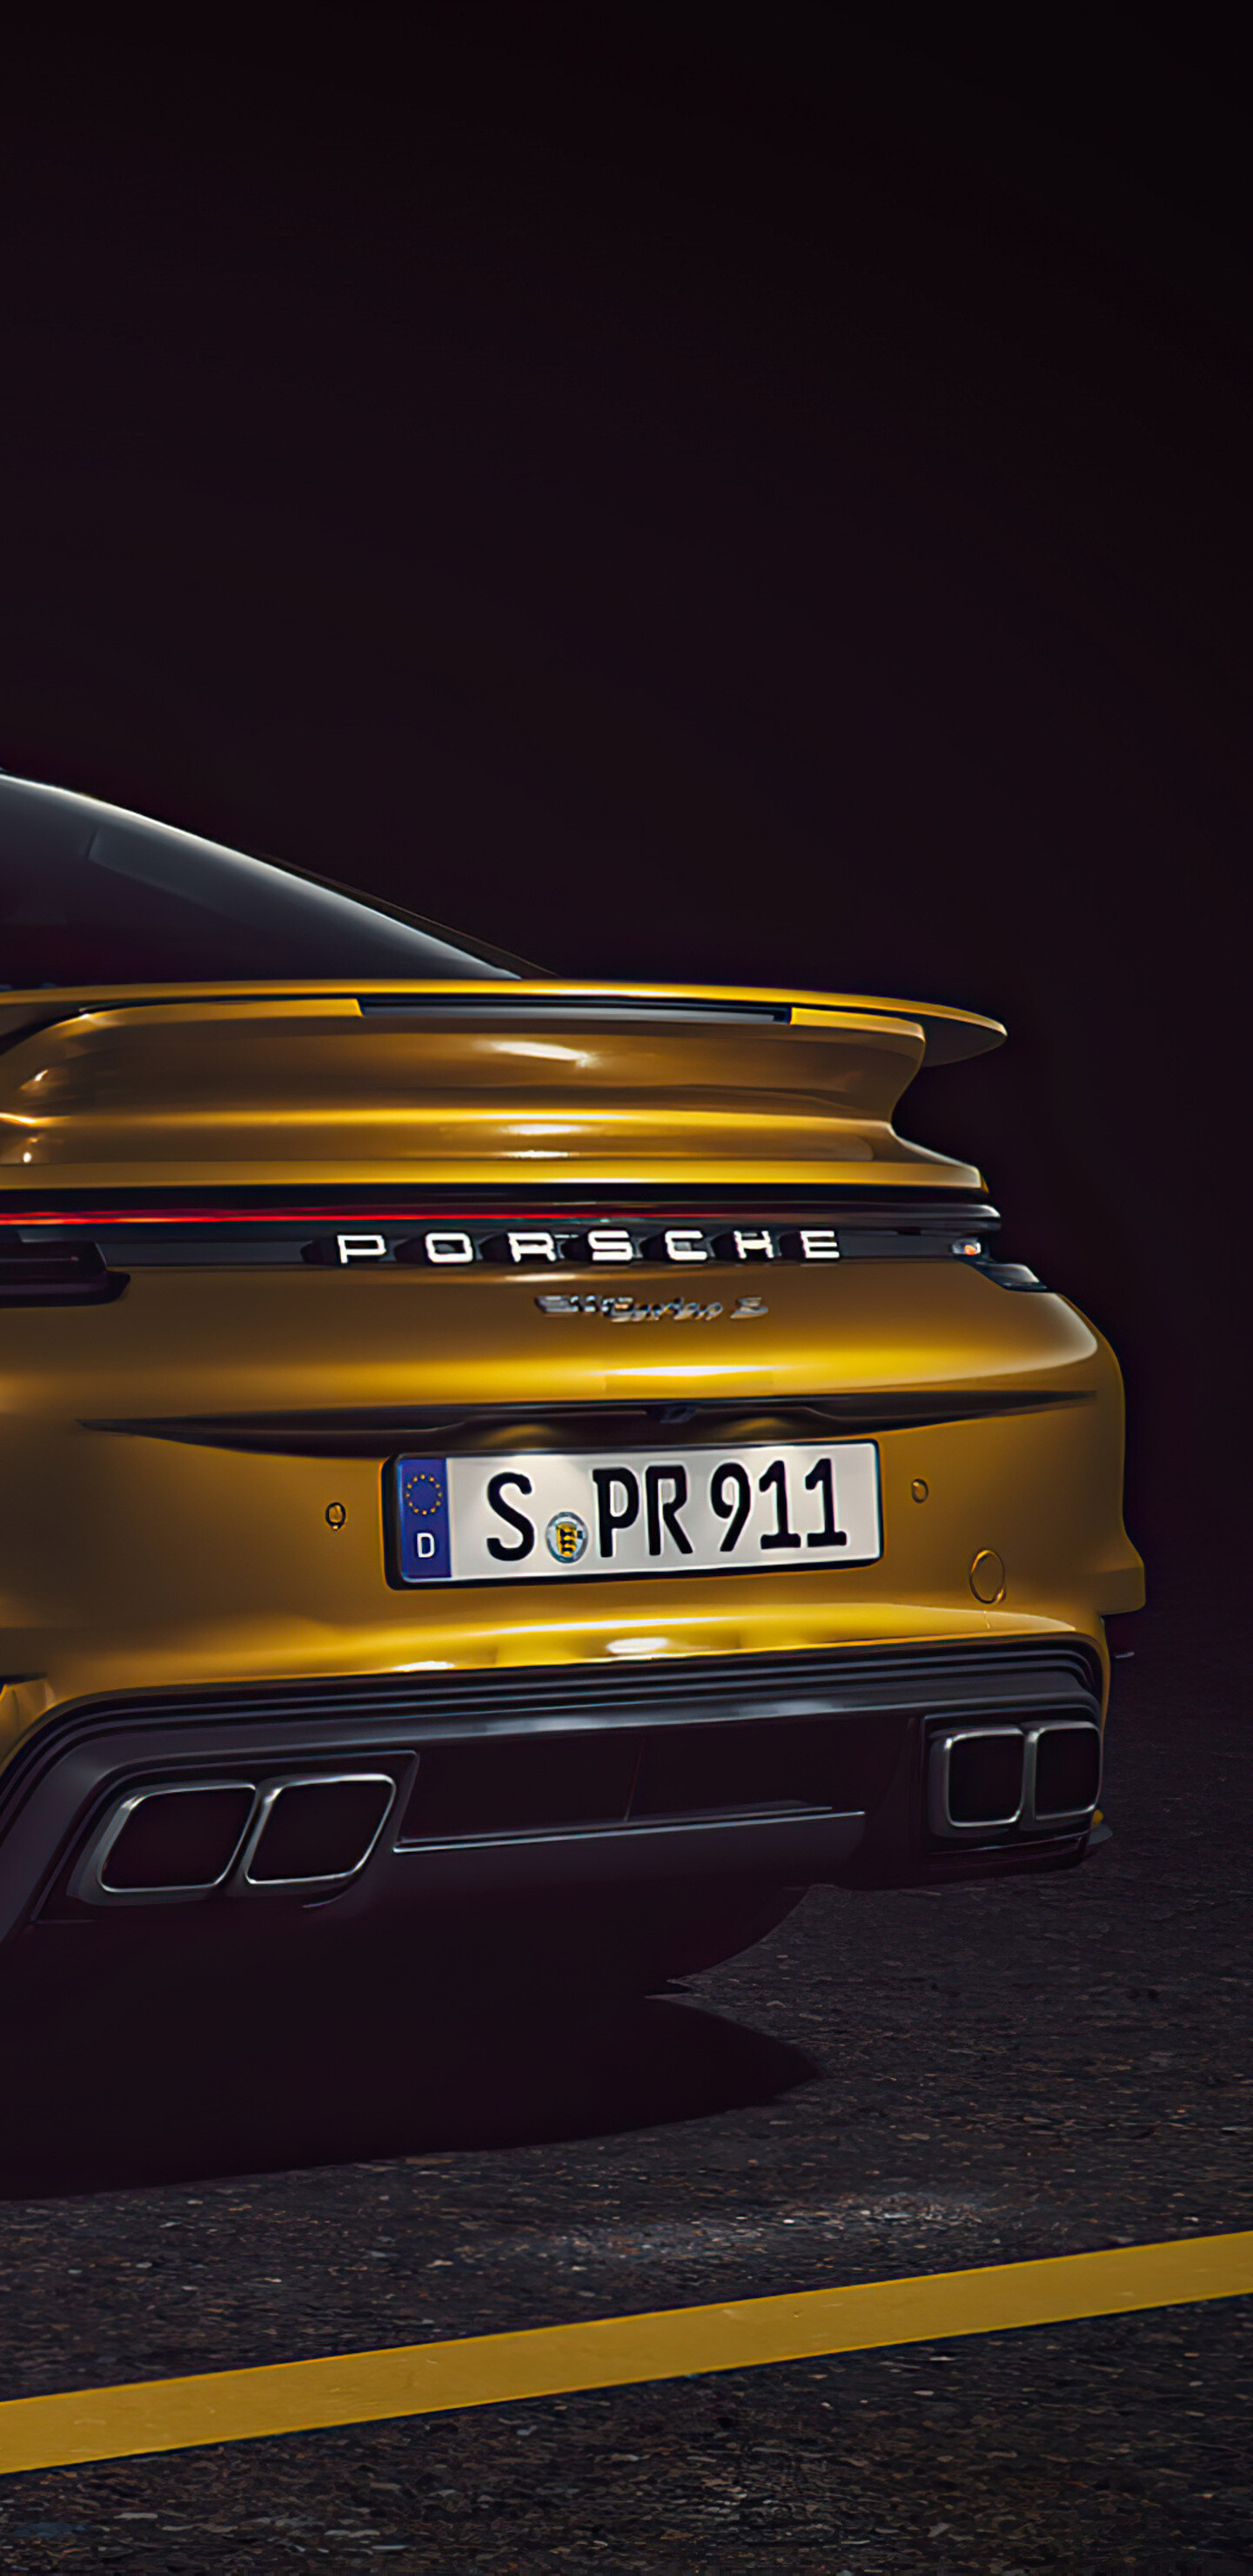 Porsche: Turbo S, The petrol variant in the 911 lineup. 1440x2960 HD Background.